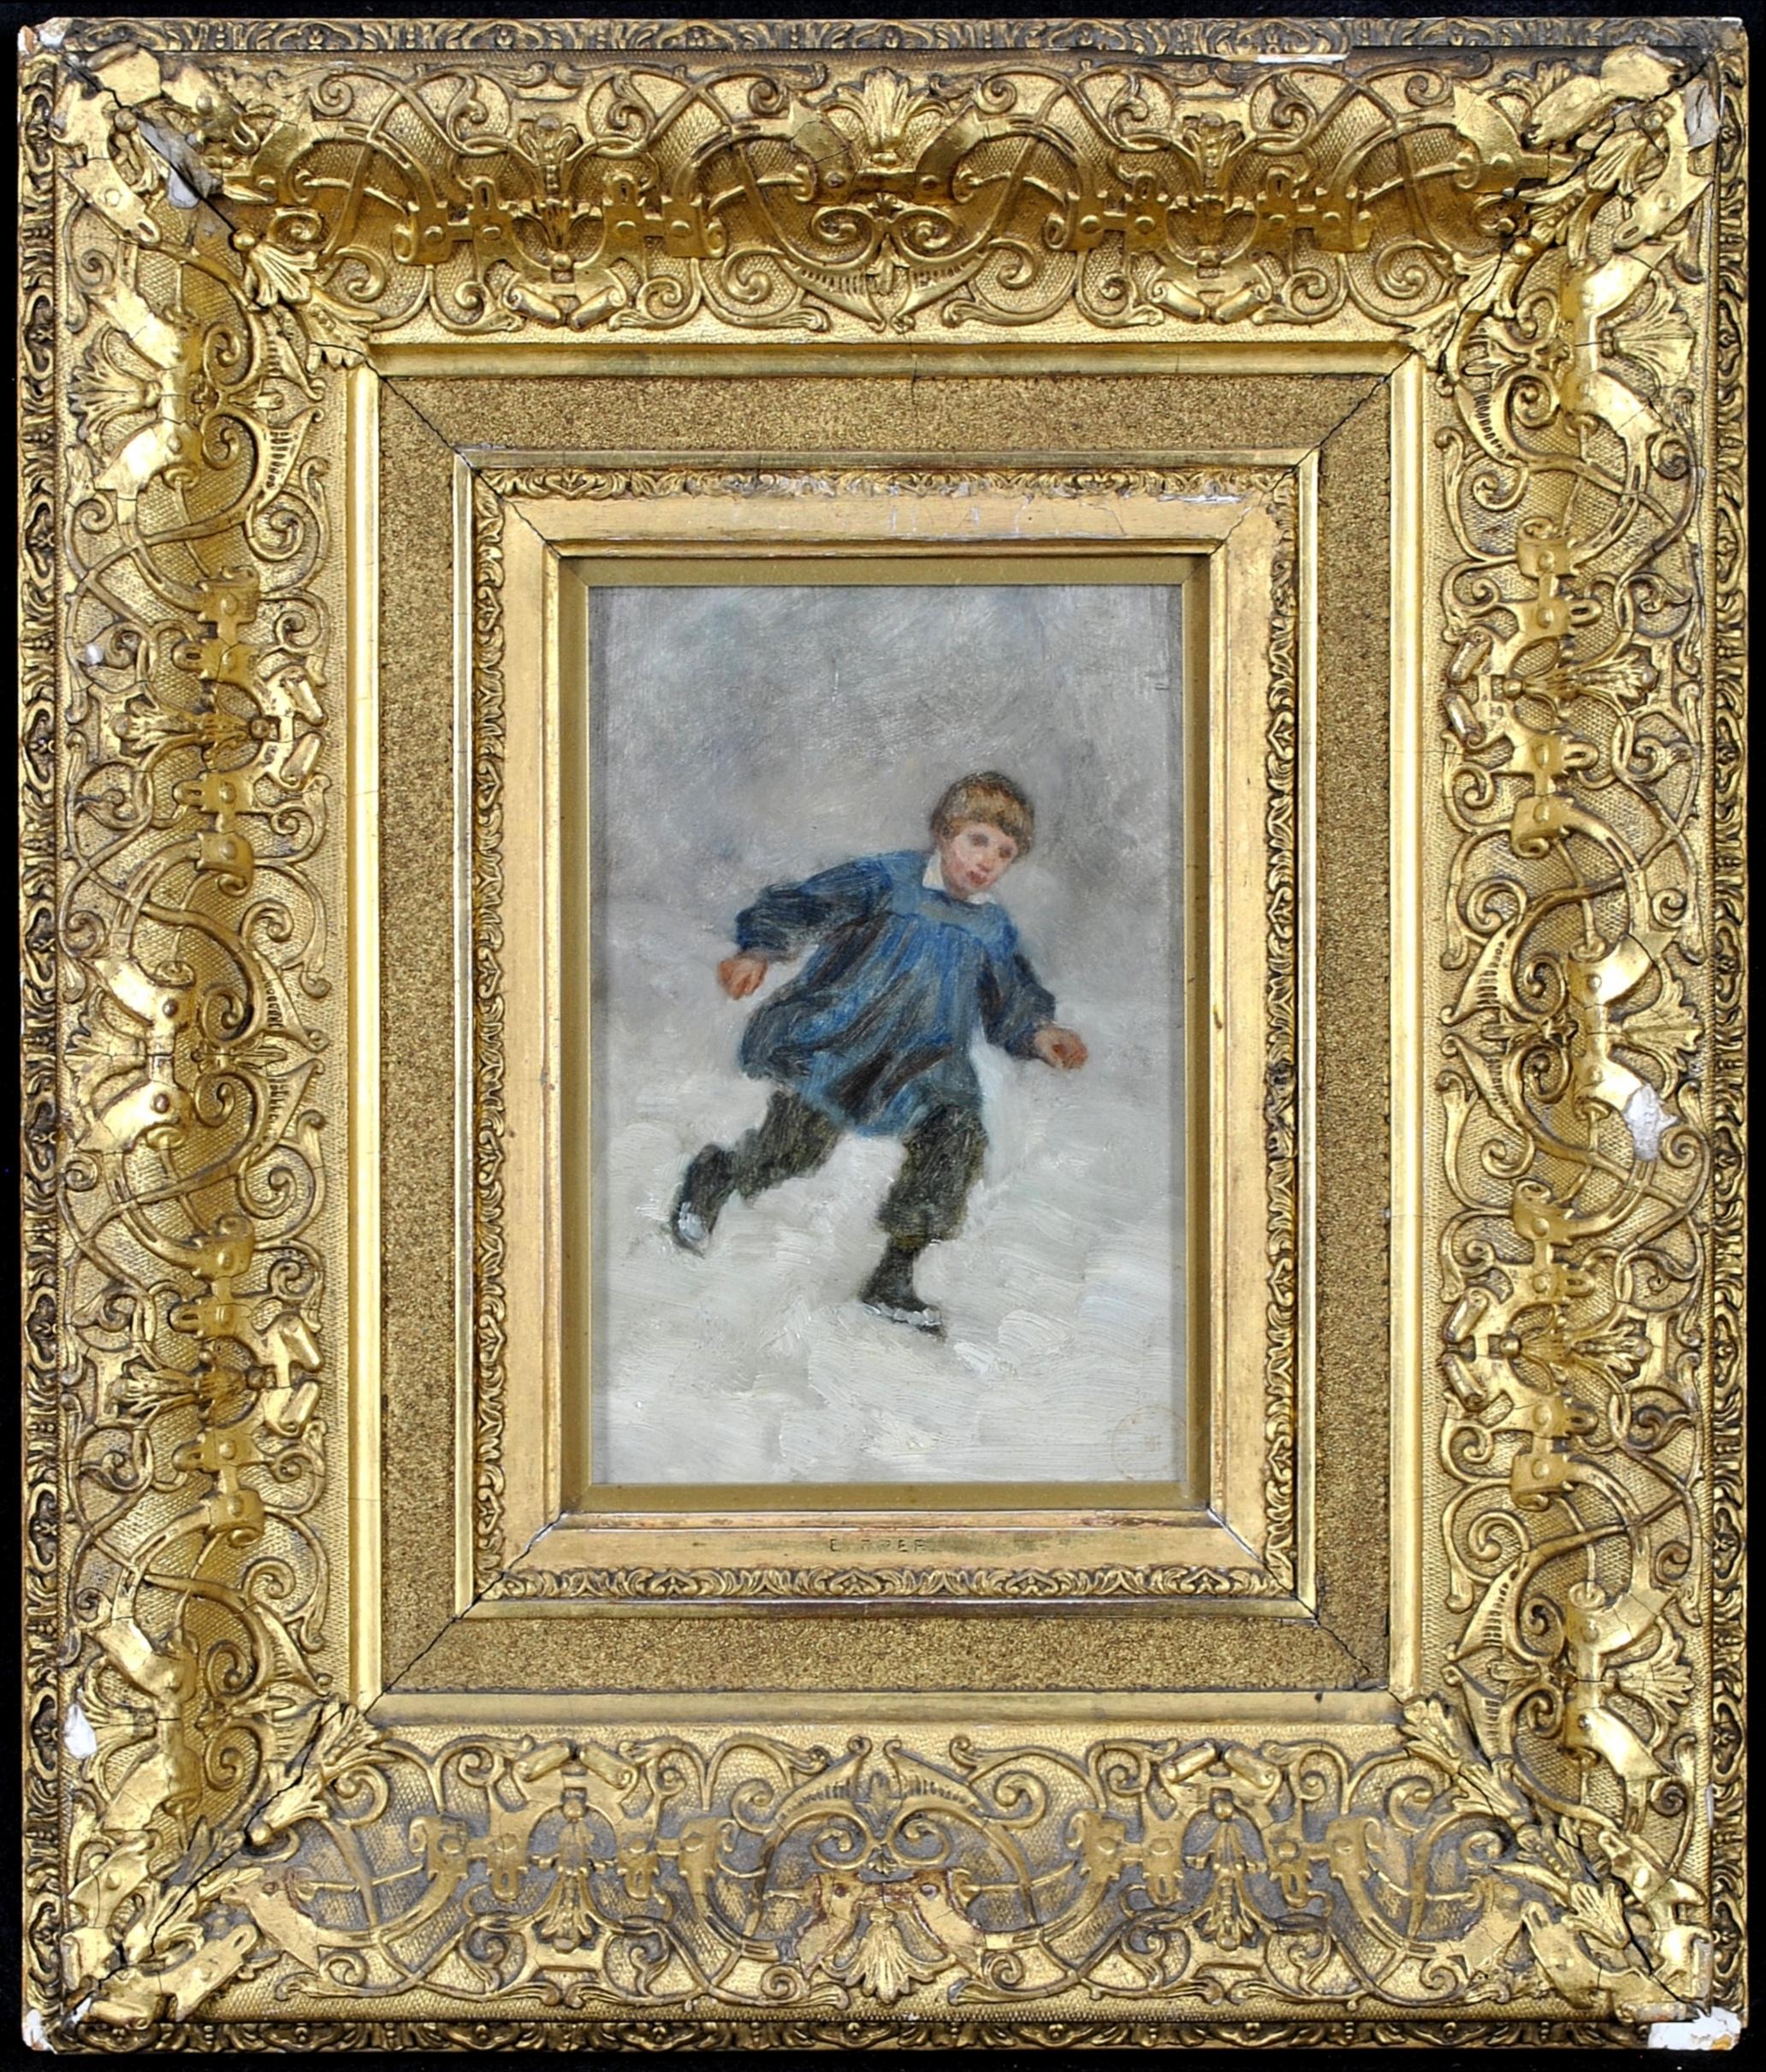 Boy in the Snow - 19th Century French Impressionist Antique Portrait Painting